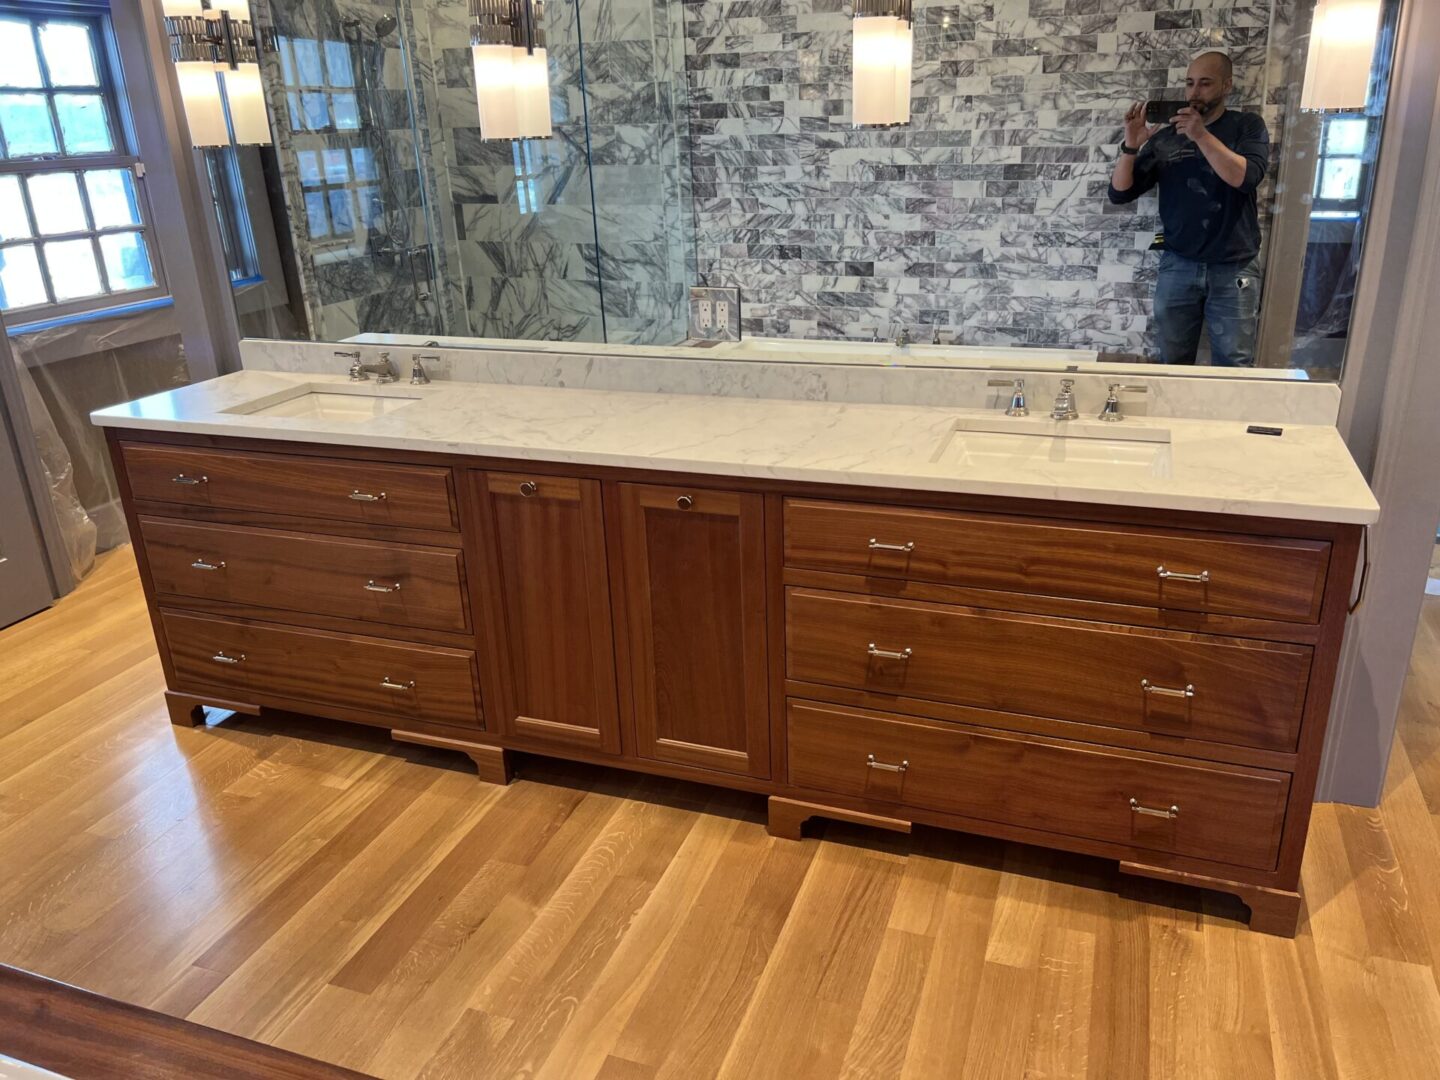 Wash area with mirror and wooden cabinets